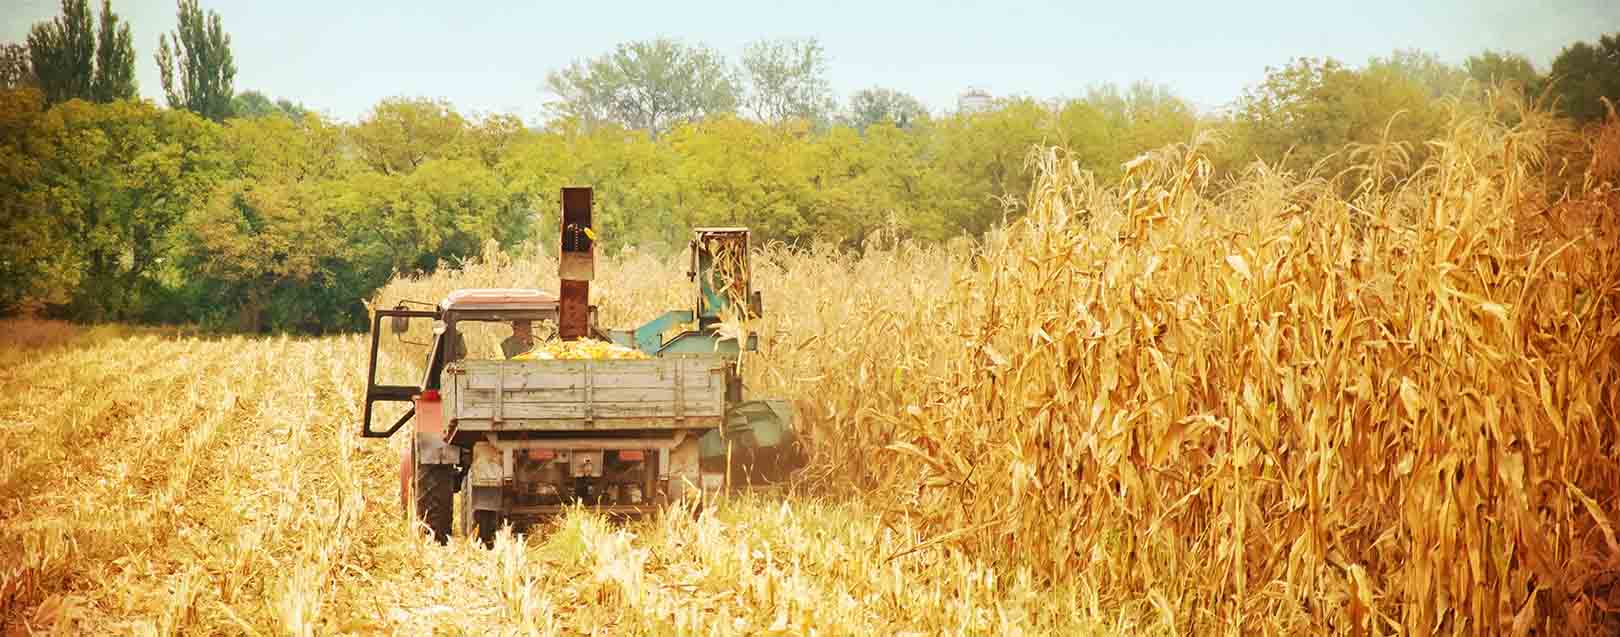 Corn import tender cancelled; government expects high yield this year